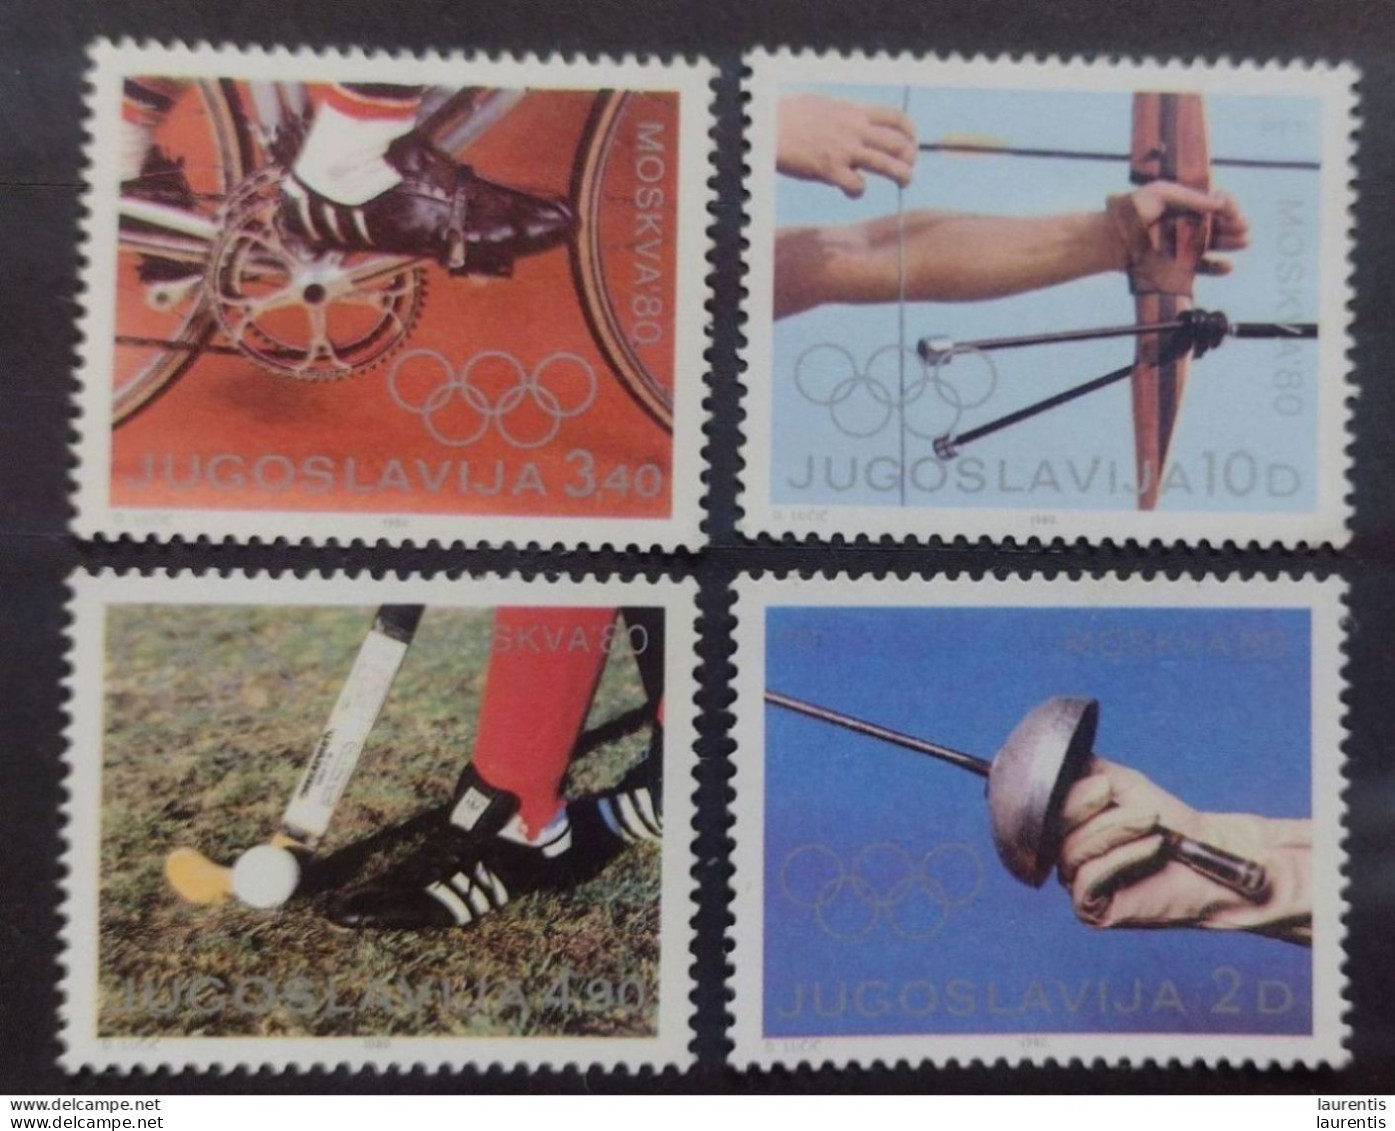 D1256. Cycling - Hockey (Field) - Fencing - Archery - OG Moscow 80 - MNH - 1,25 - Cycling